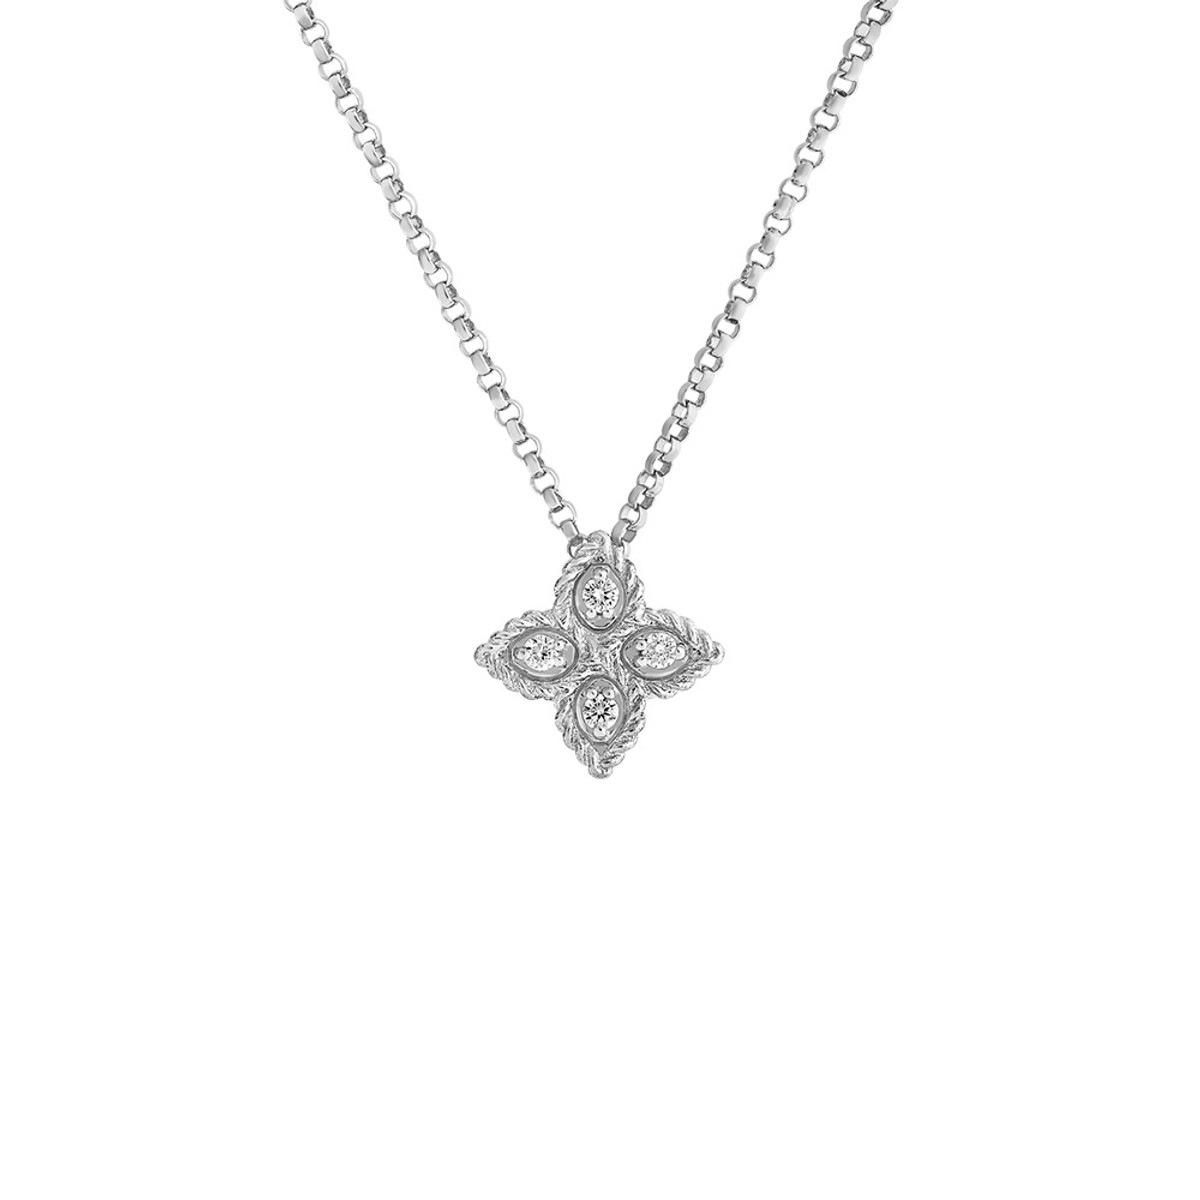 Roberto Coin Princess Flower 18KT White Gold & Diamond Small Pendant-DNKFY7421 Product Image